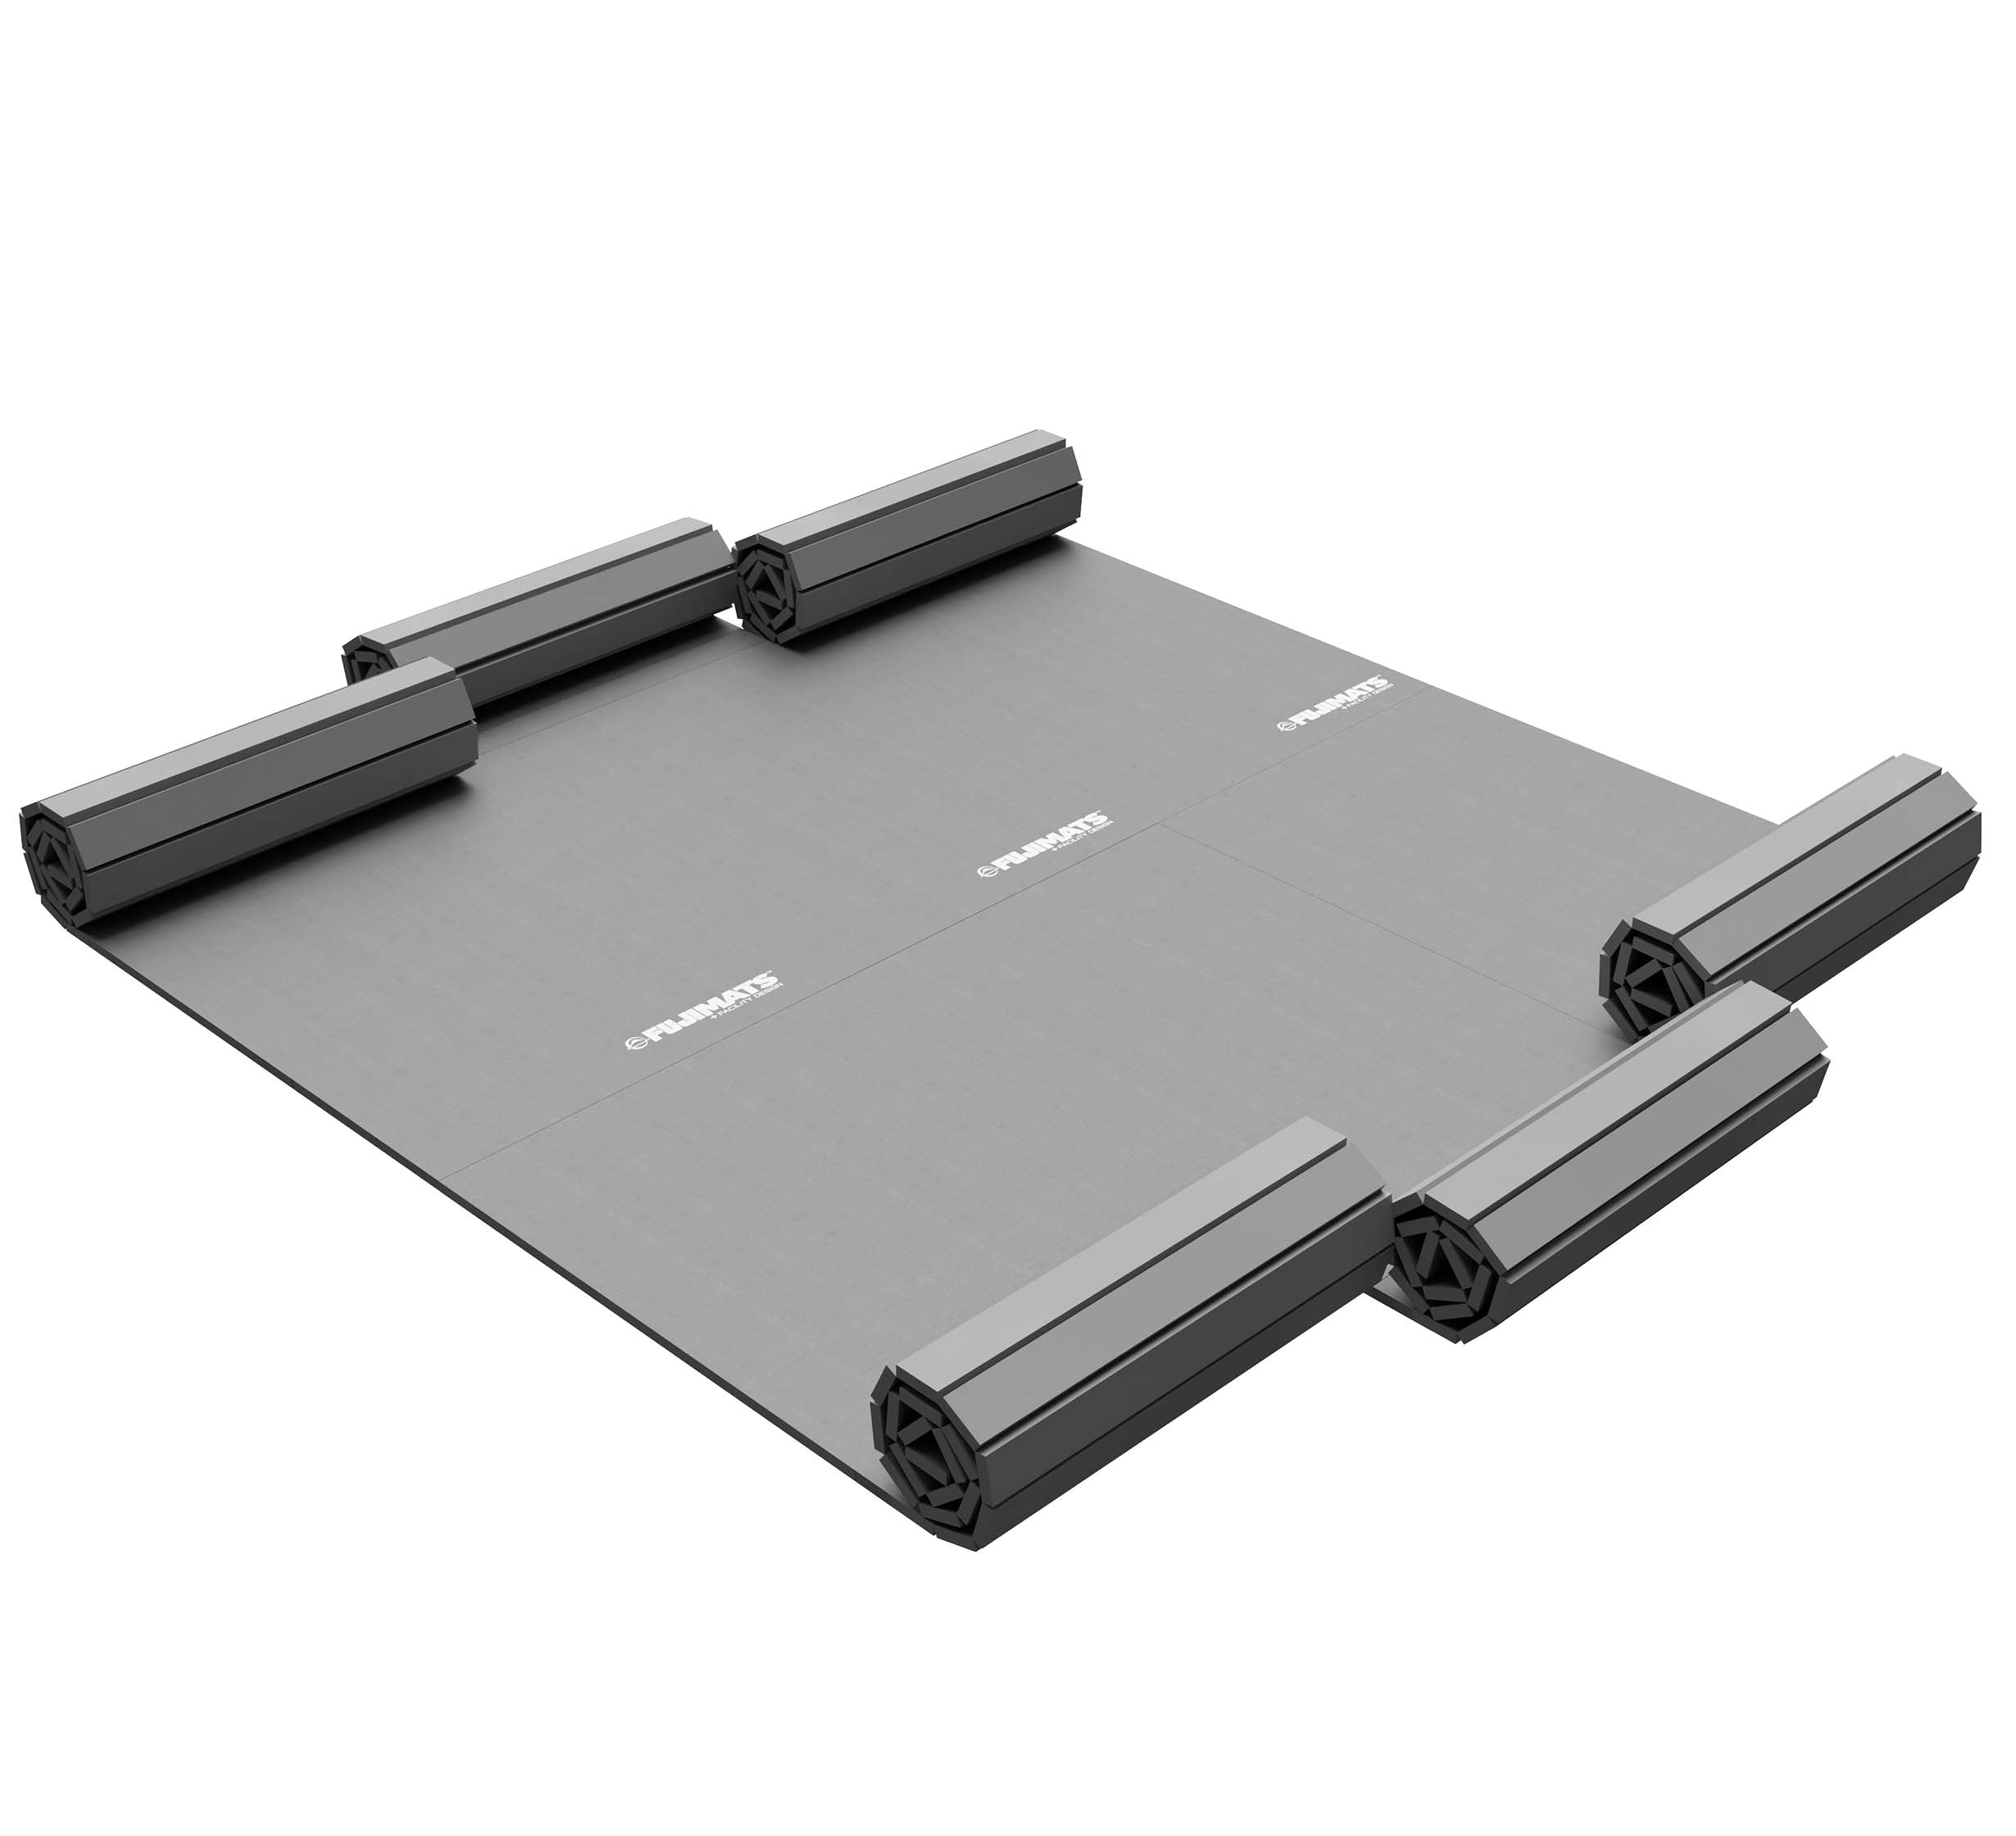 Home Roll Out Mats Tatami Series Gray